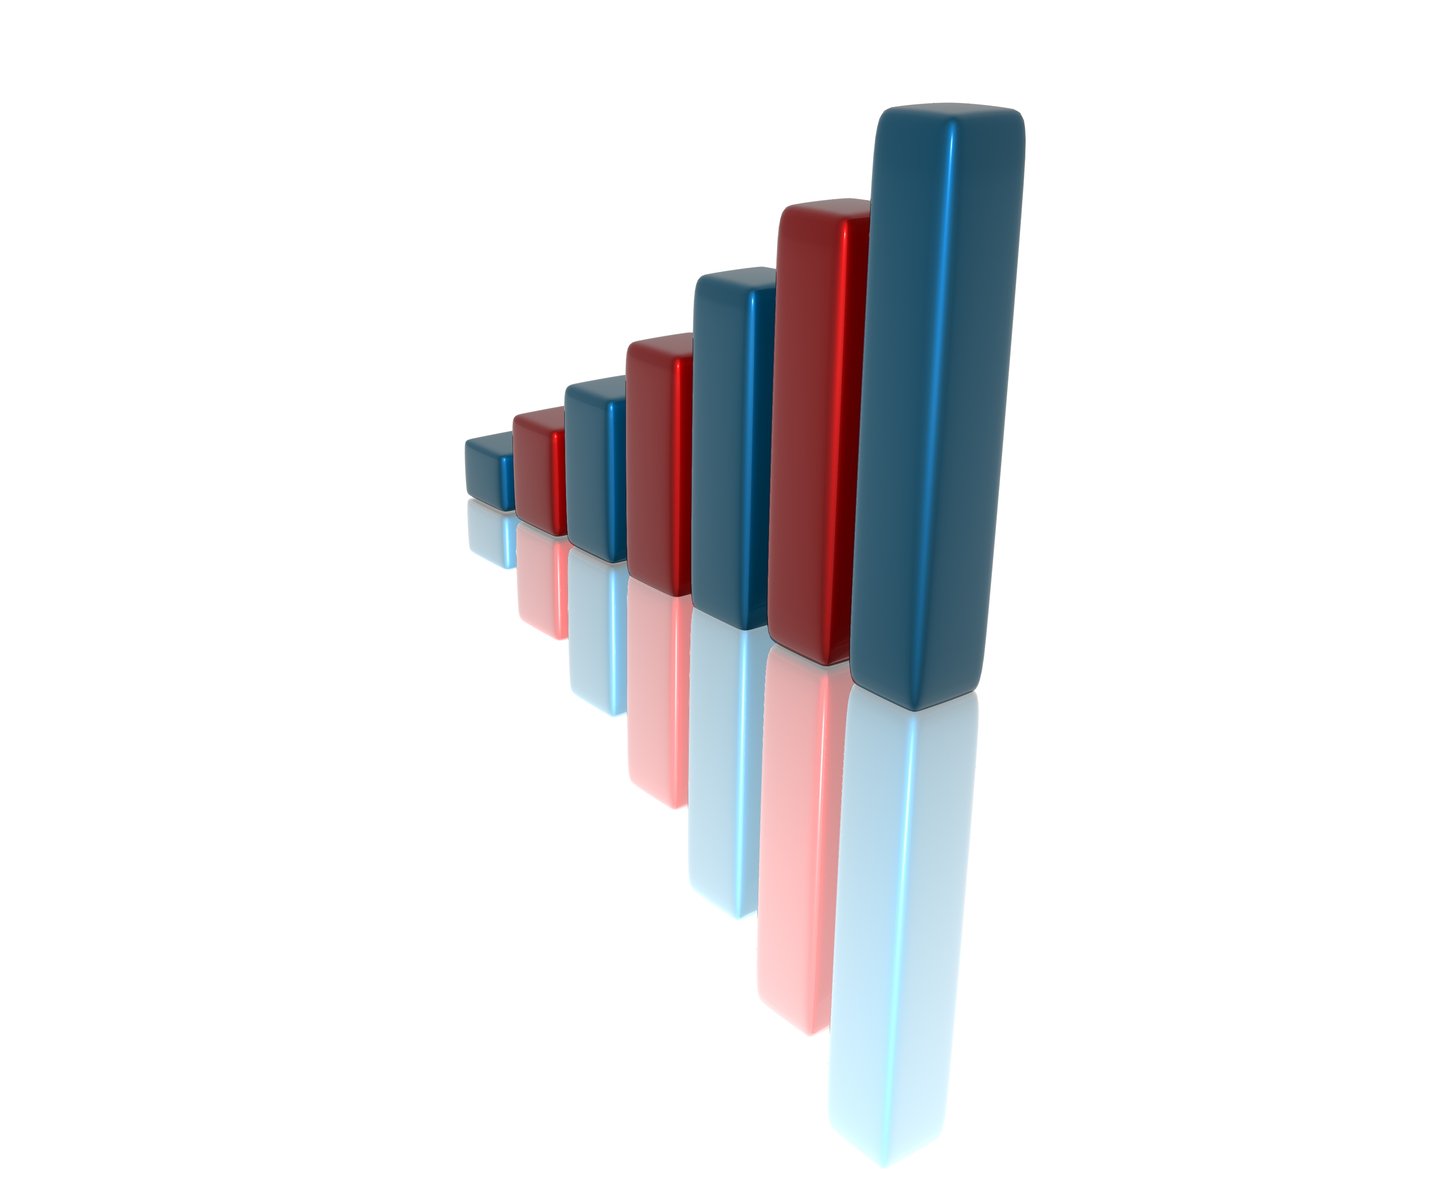 three bar chart with one red, white, and blue one